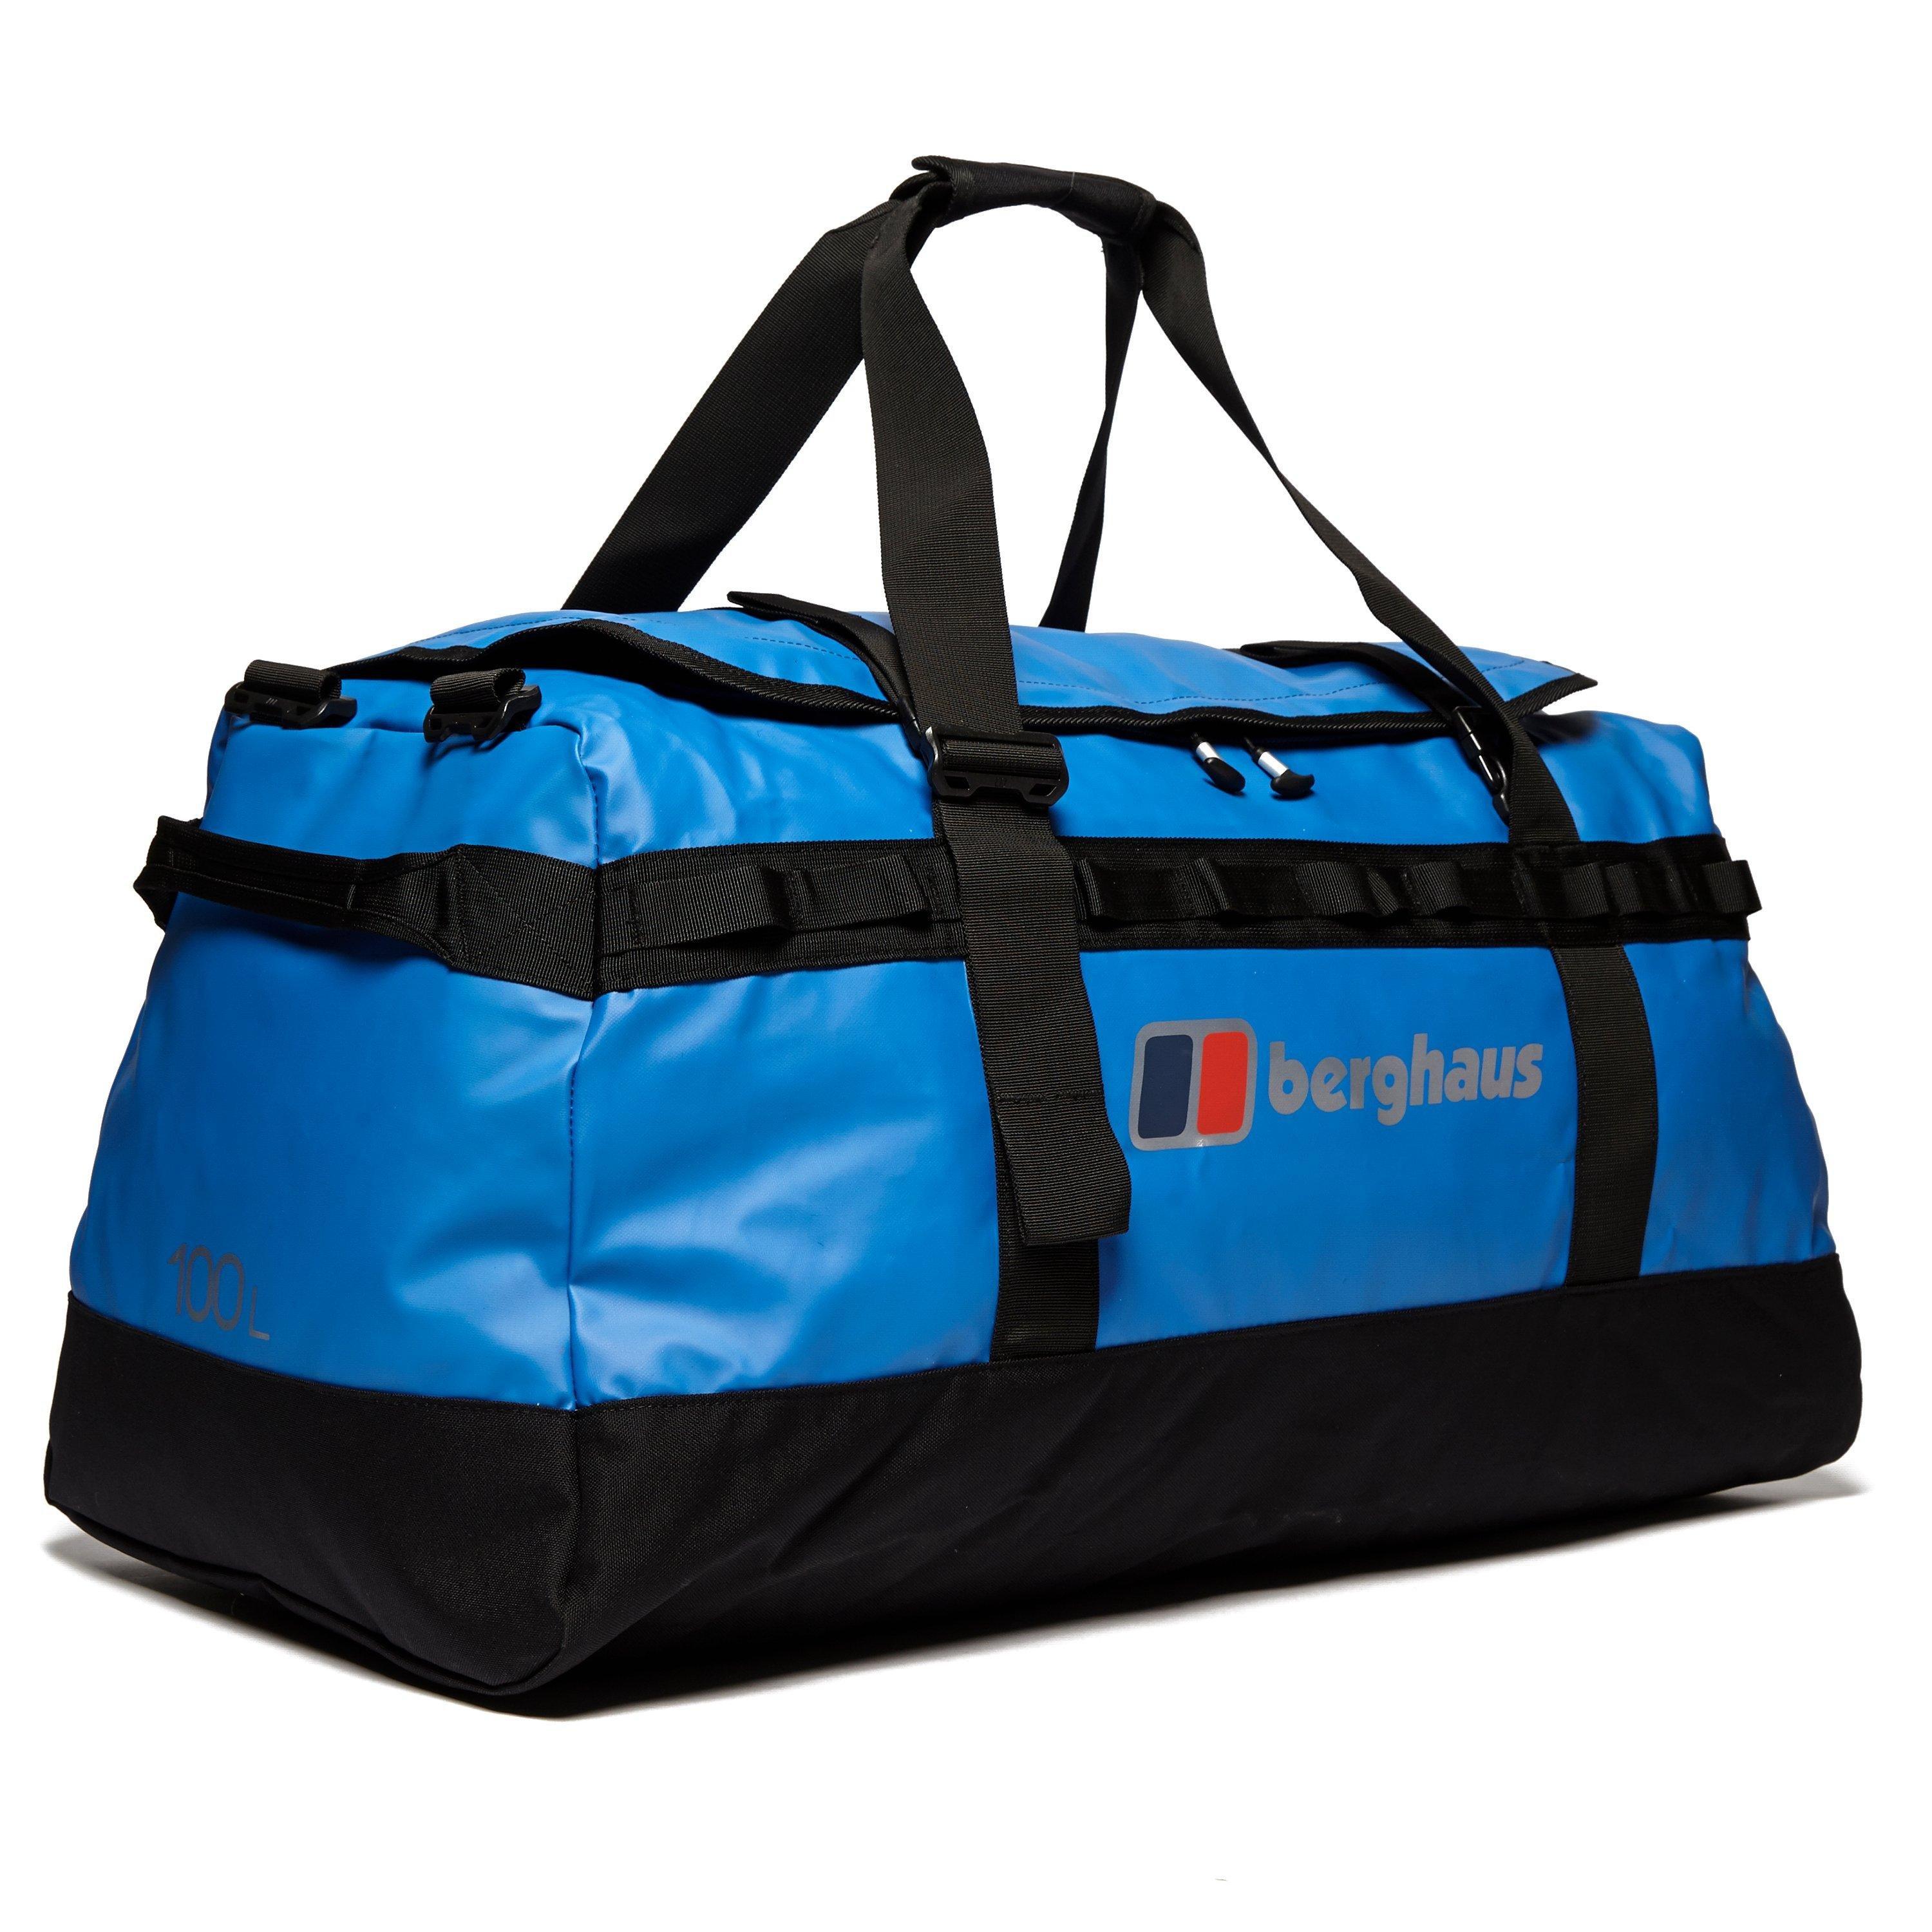 Berghaus 100L Holdall Review